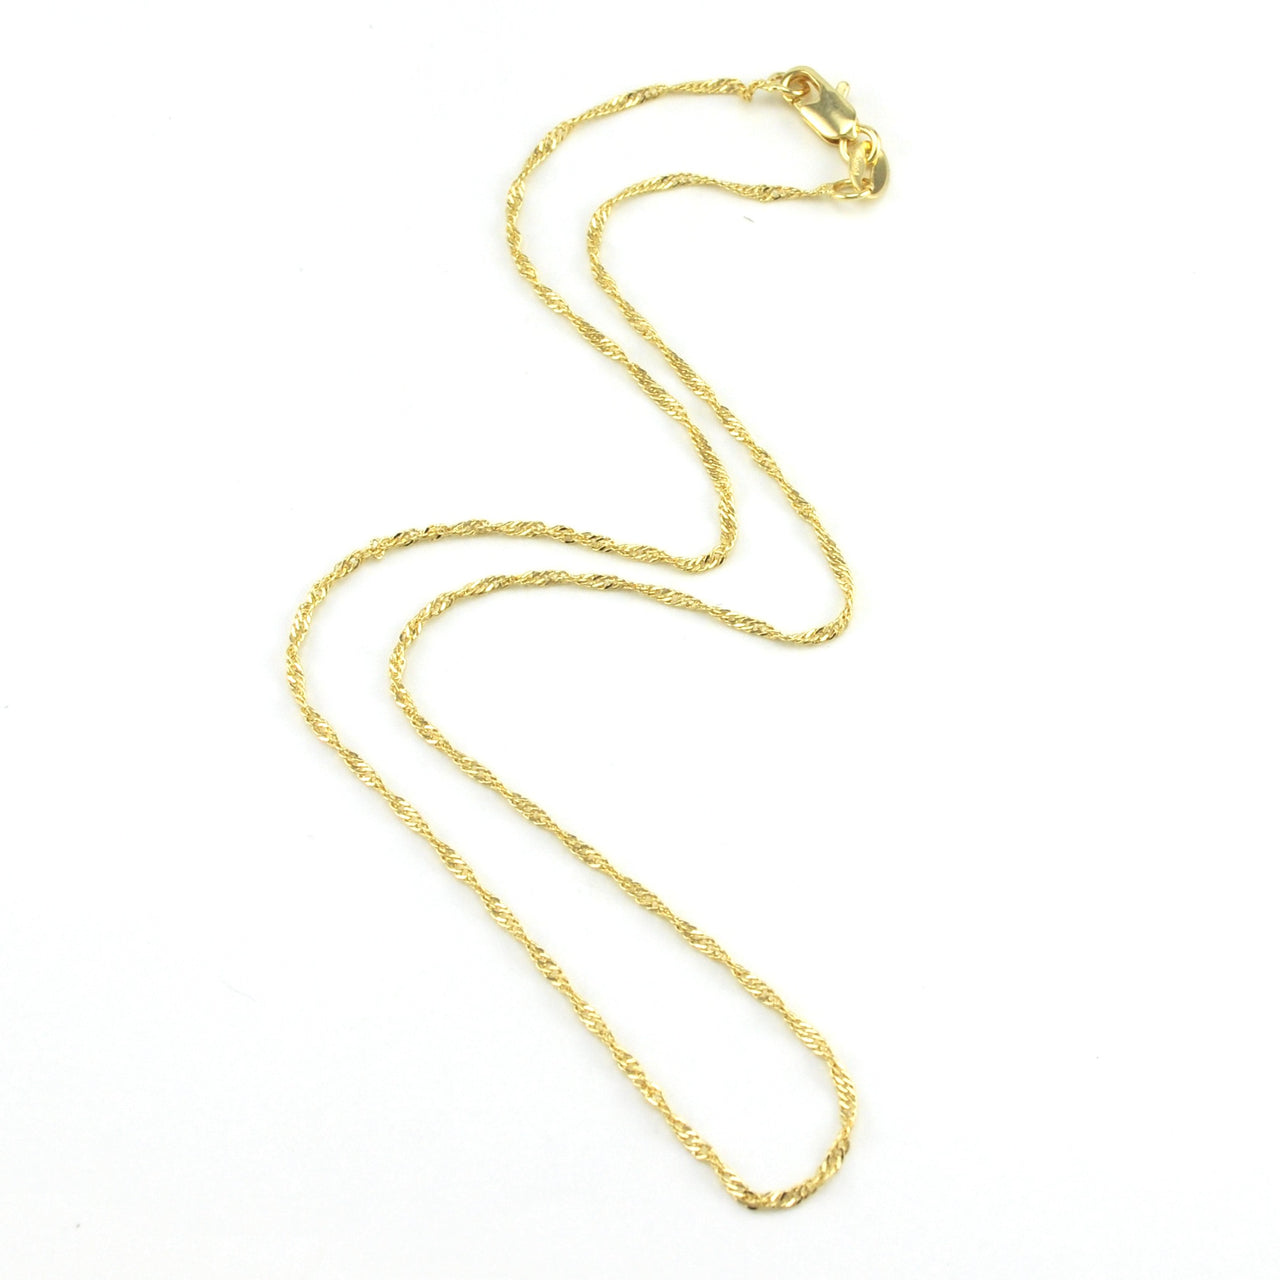 18k Gold Fill 16 Inch Singapore 1.7mm Chain